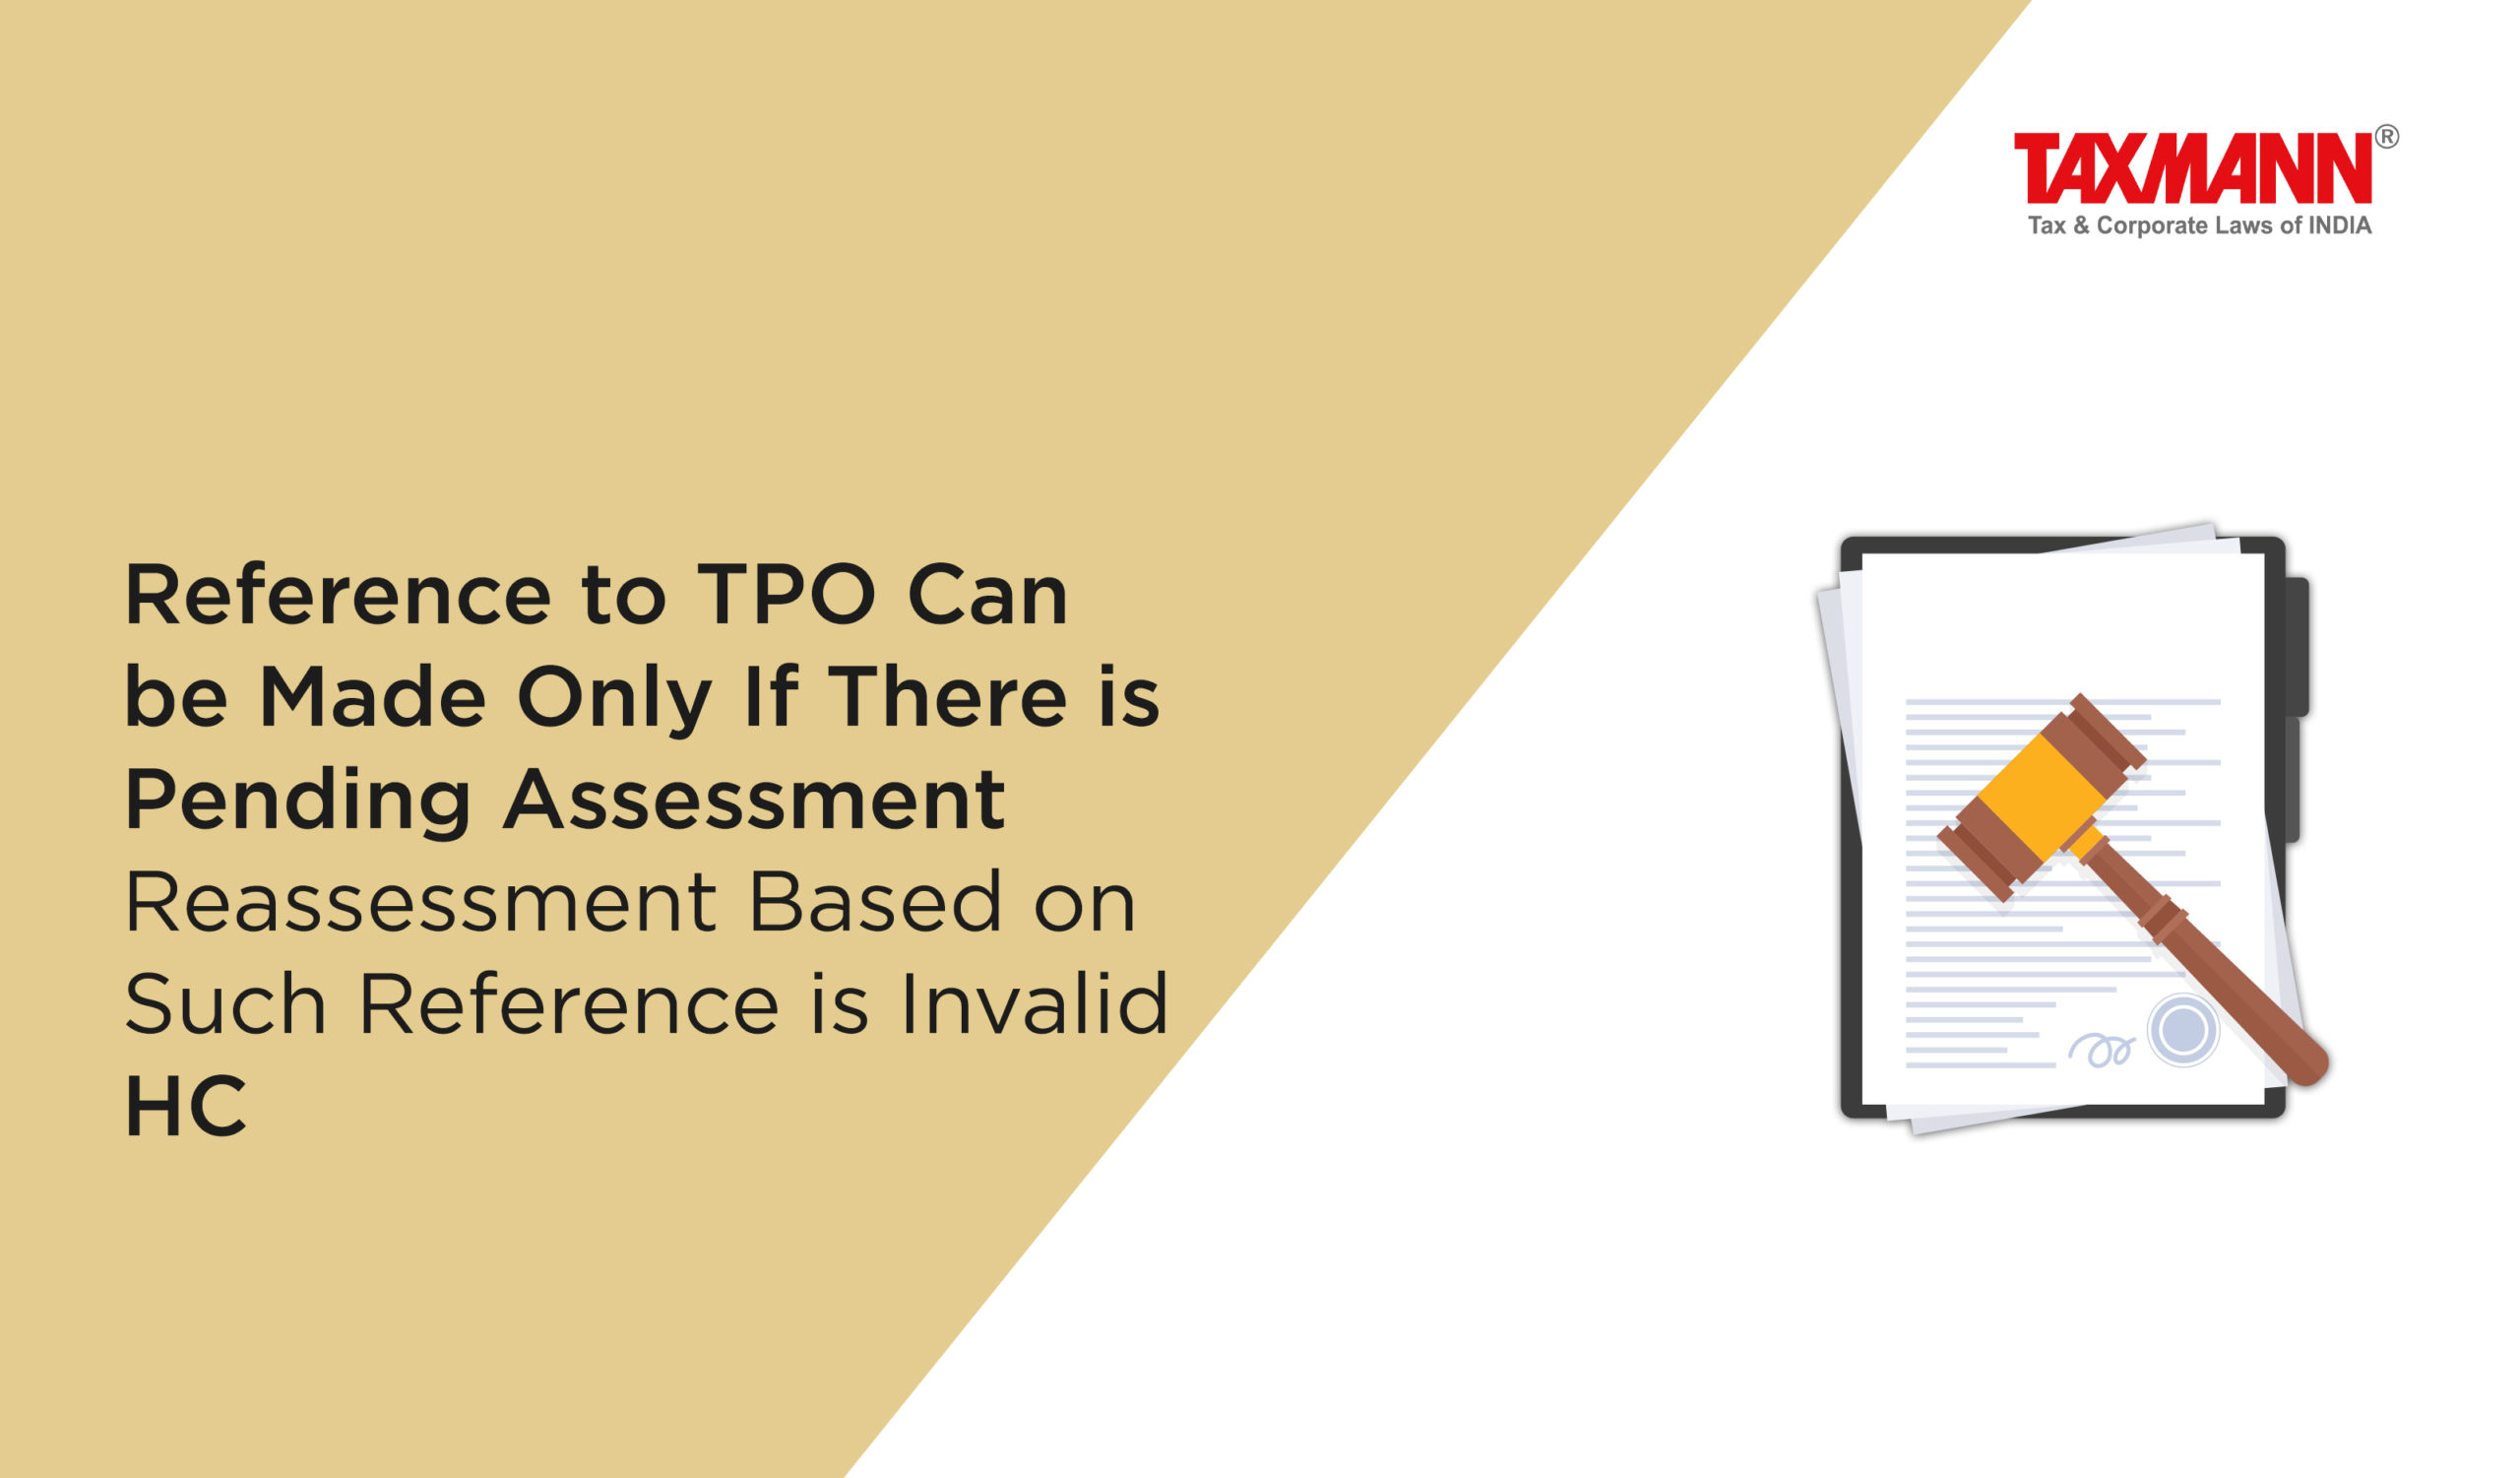 TPO under section 92CA(1)